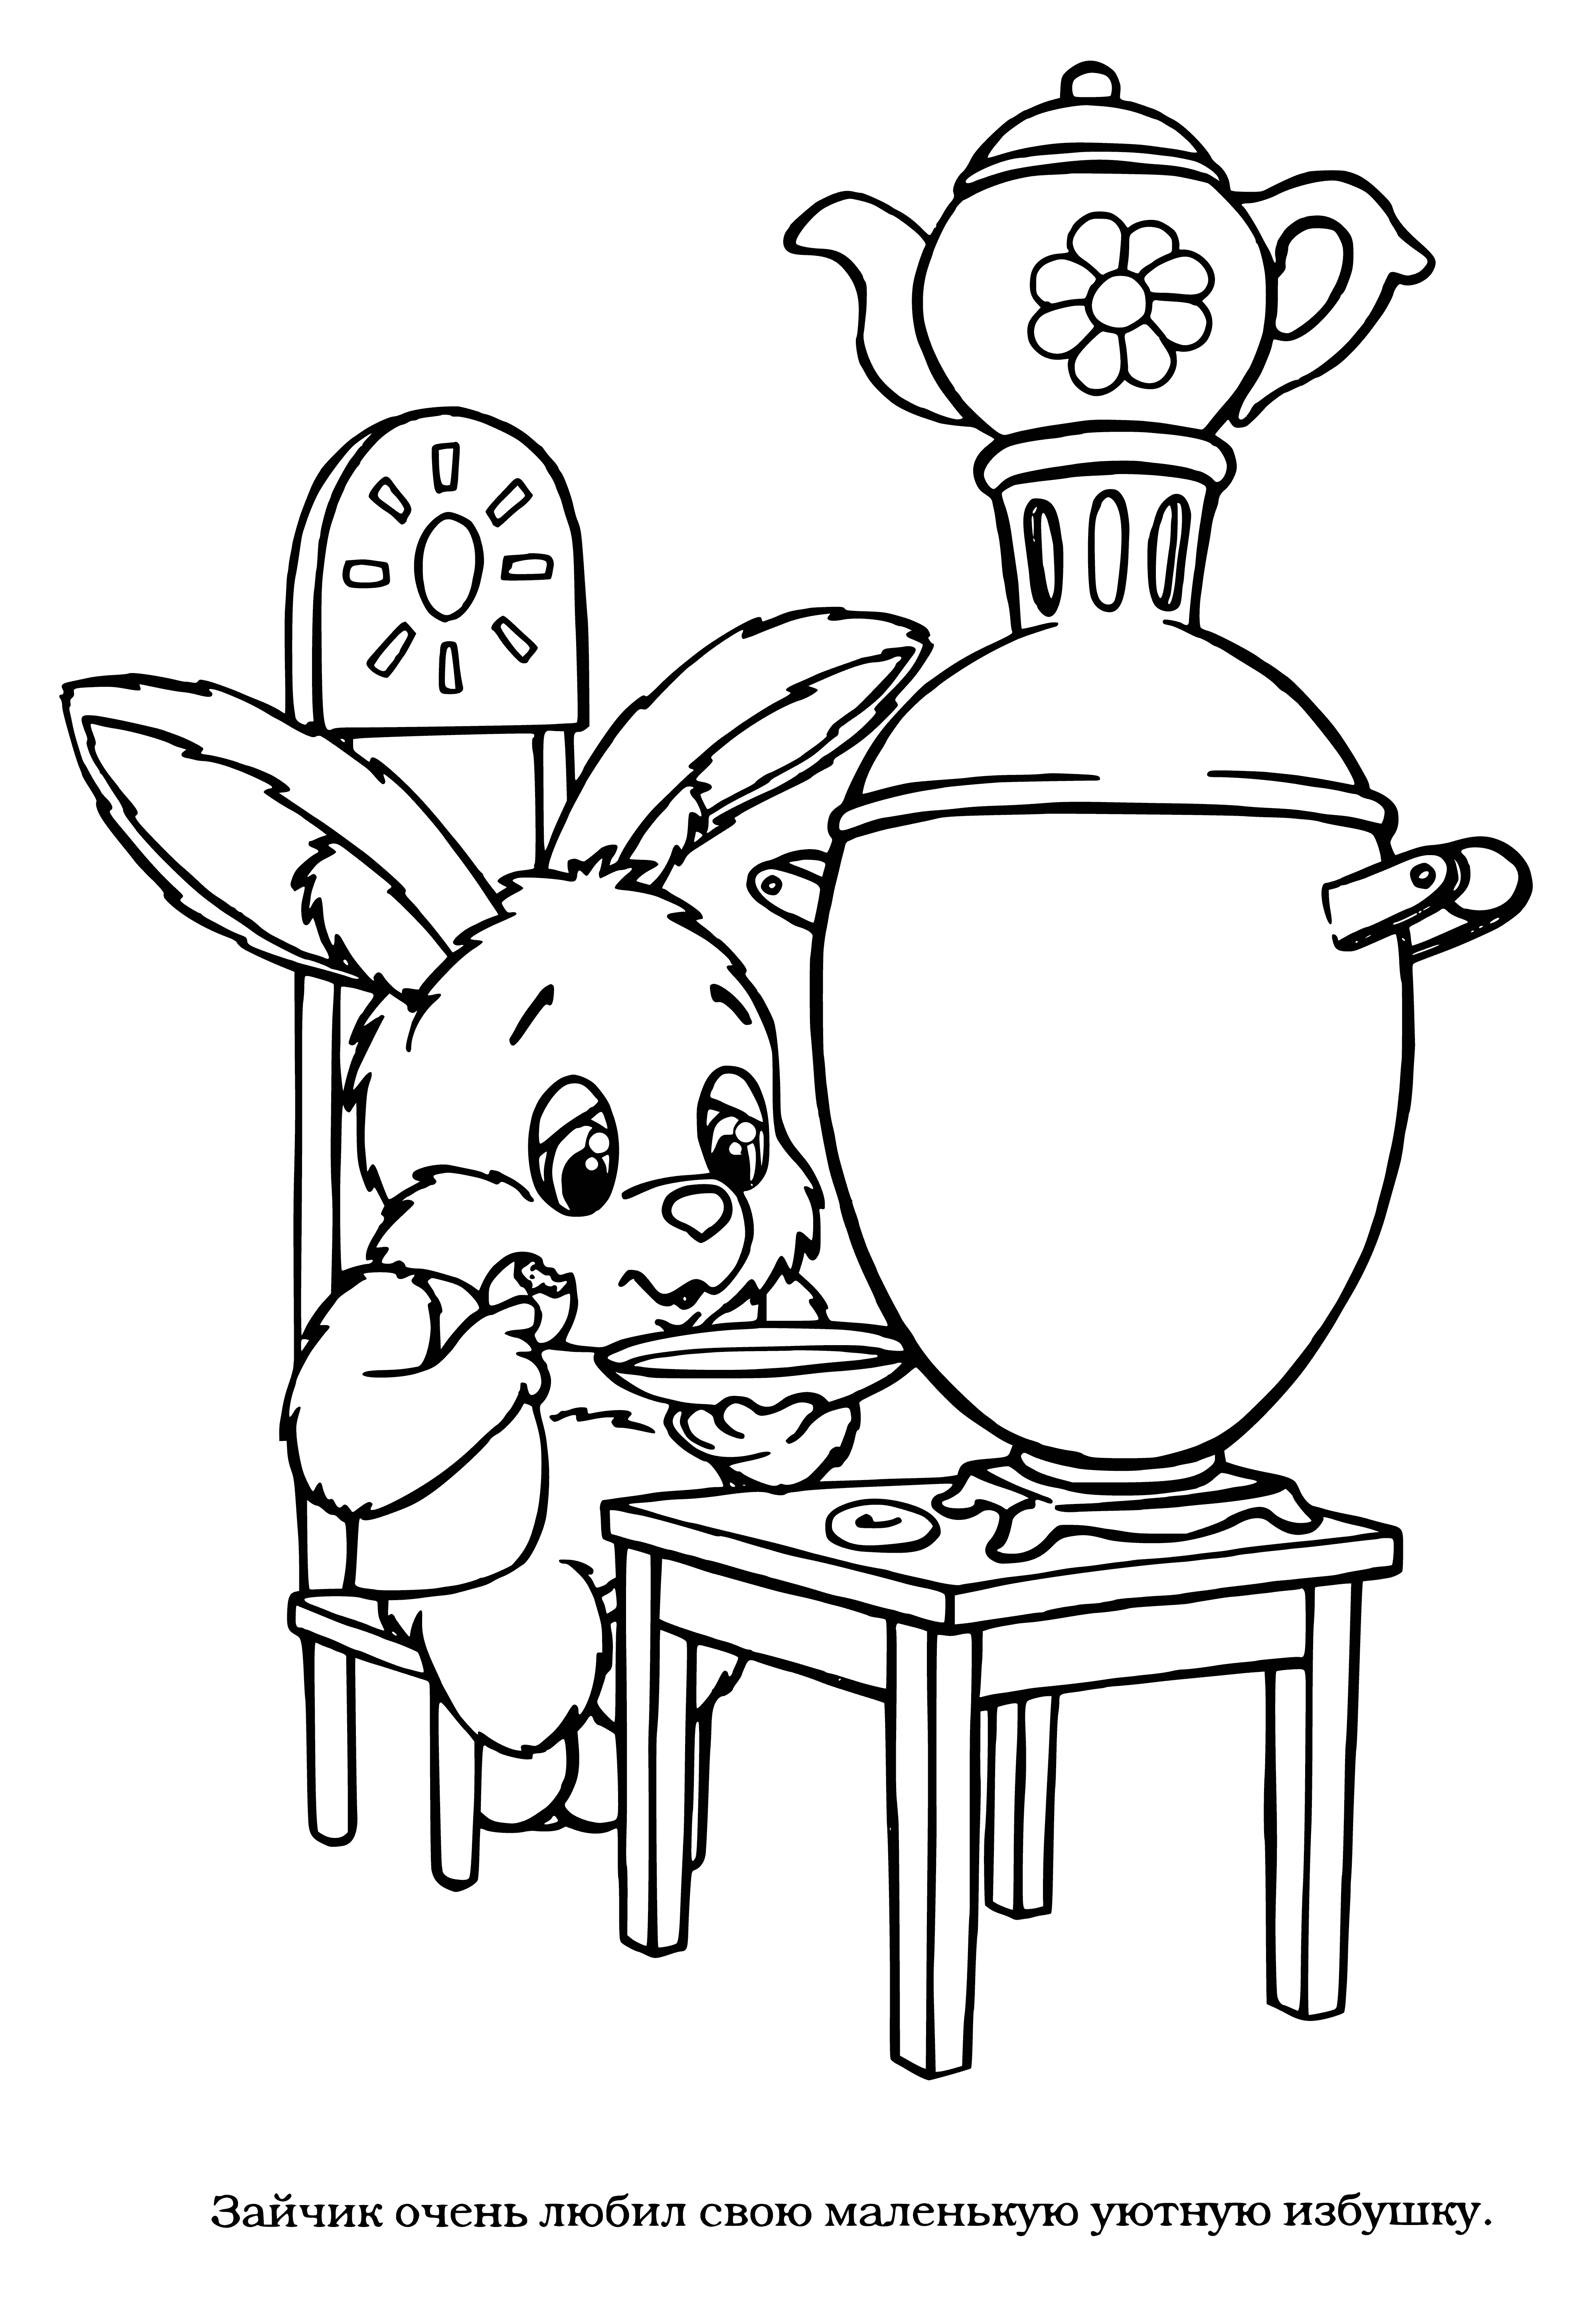 coloring page: Bunny pours tea from a samovar while a stove hangs on the wall; books and teapot & cups sit on two tables. #coloringpage